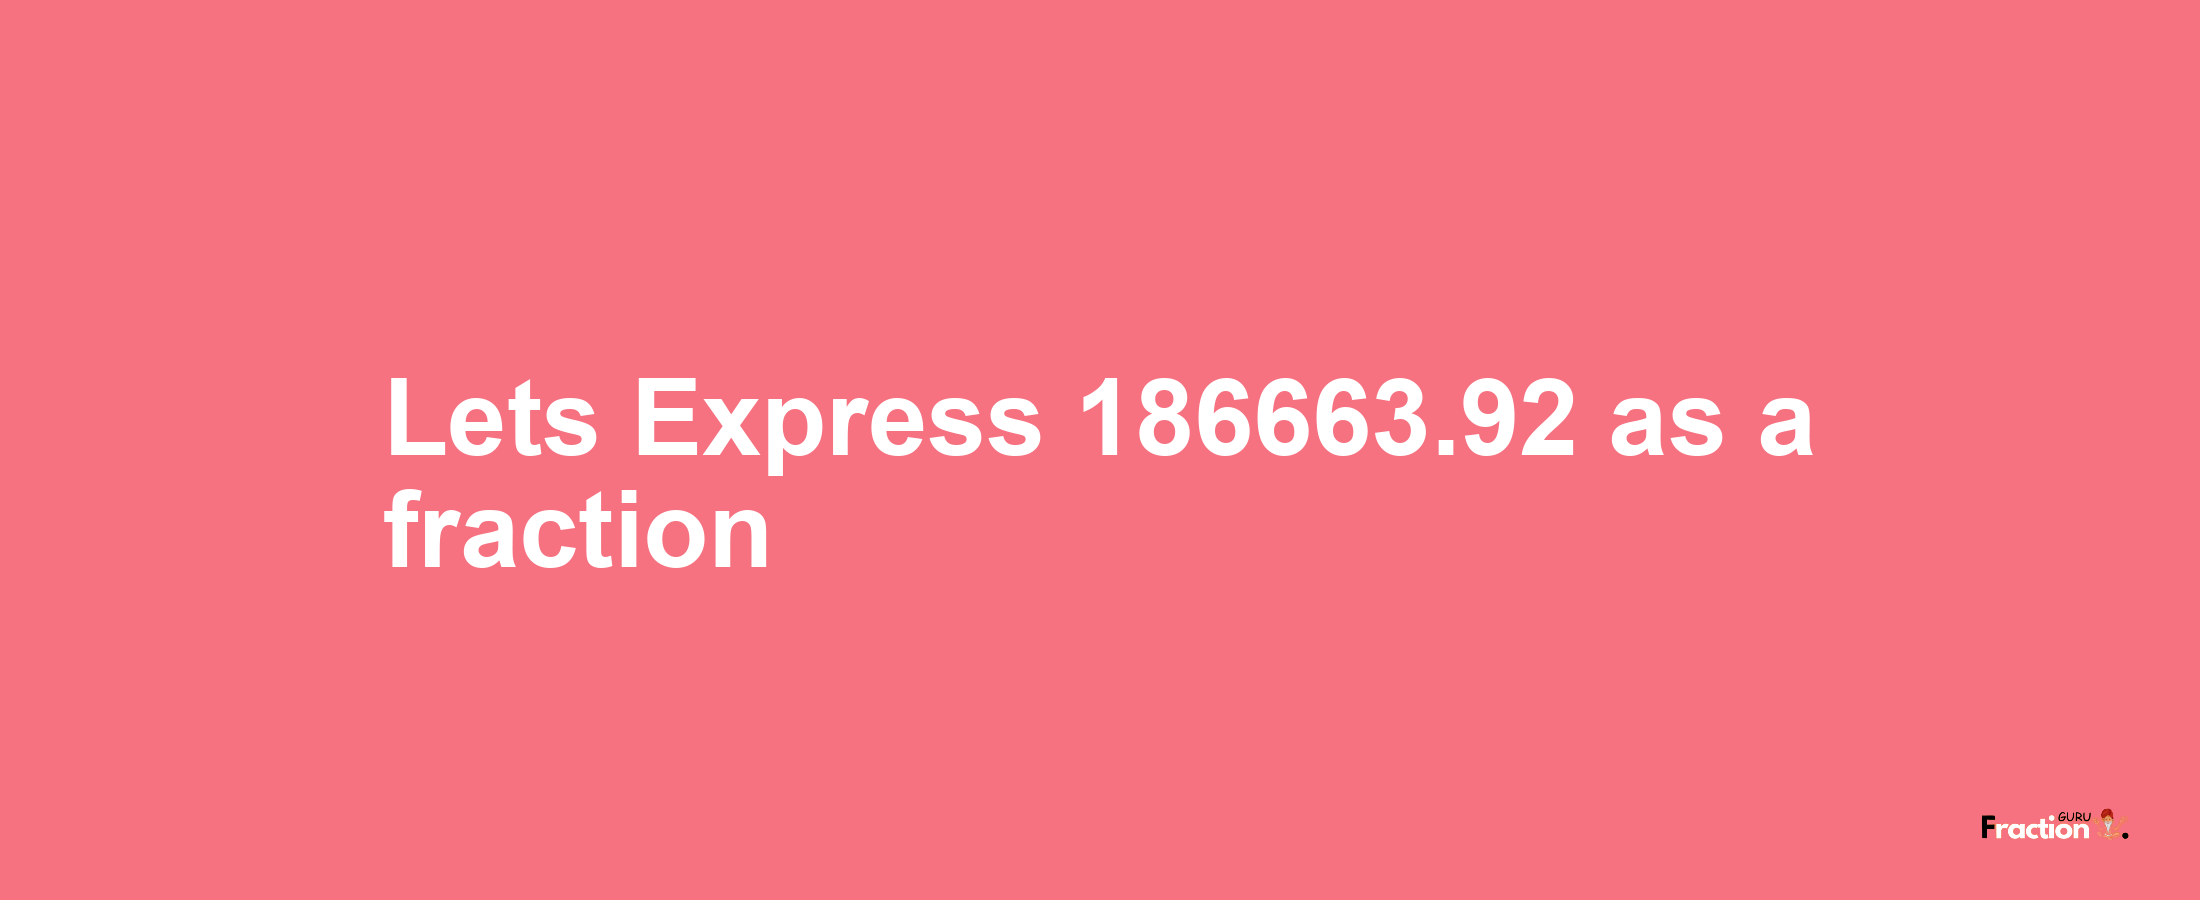 Lets Express 186663.92 as afraction